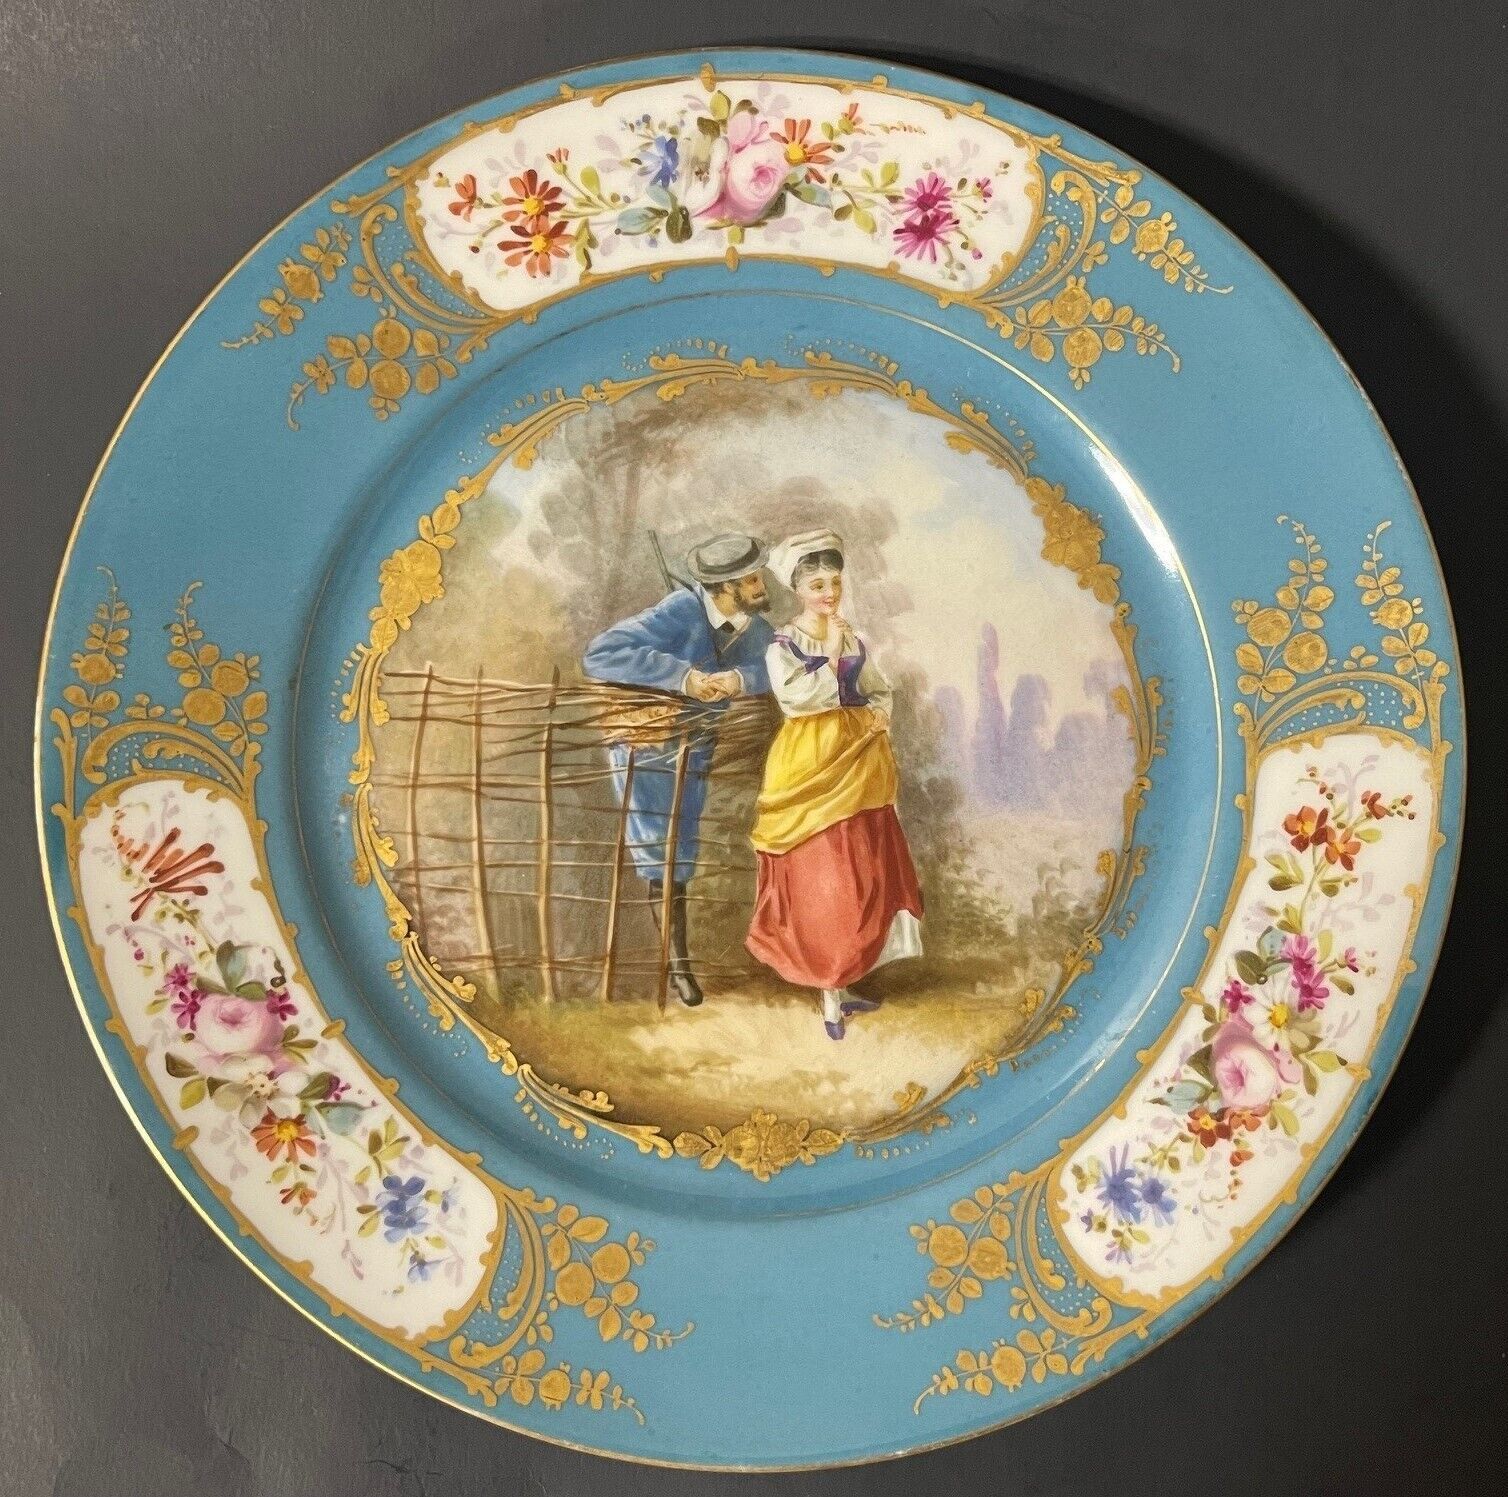 Antique 1753-1754 French Sevres Porcelain Plate with Court Scene